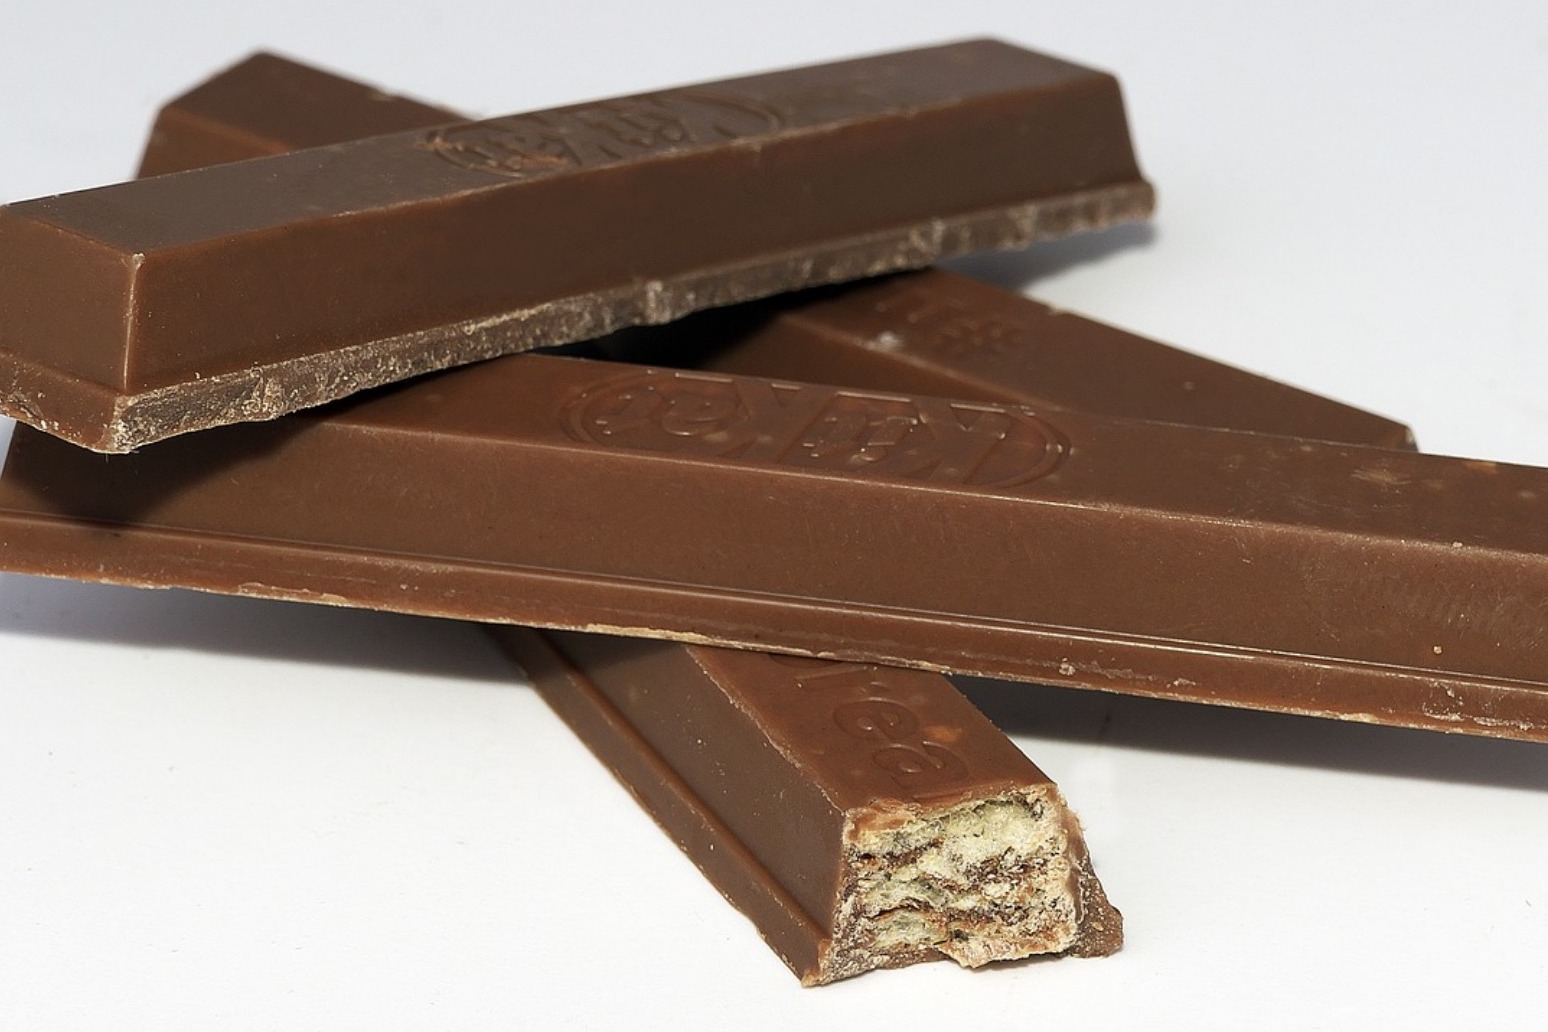 Nestle loses bid to protect shape of four-finger bar 